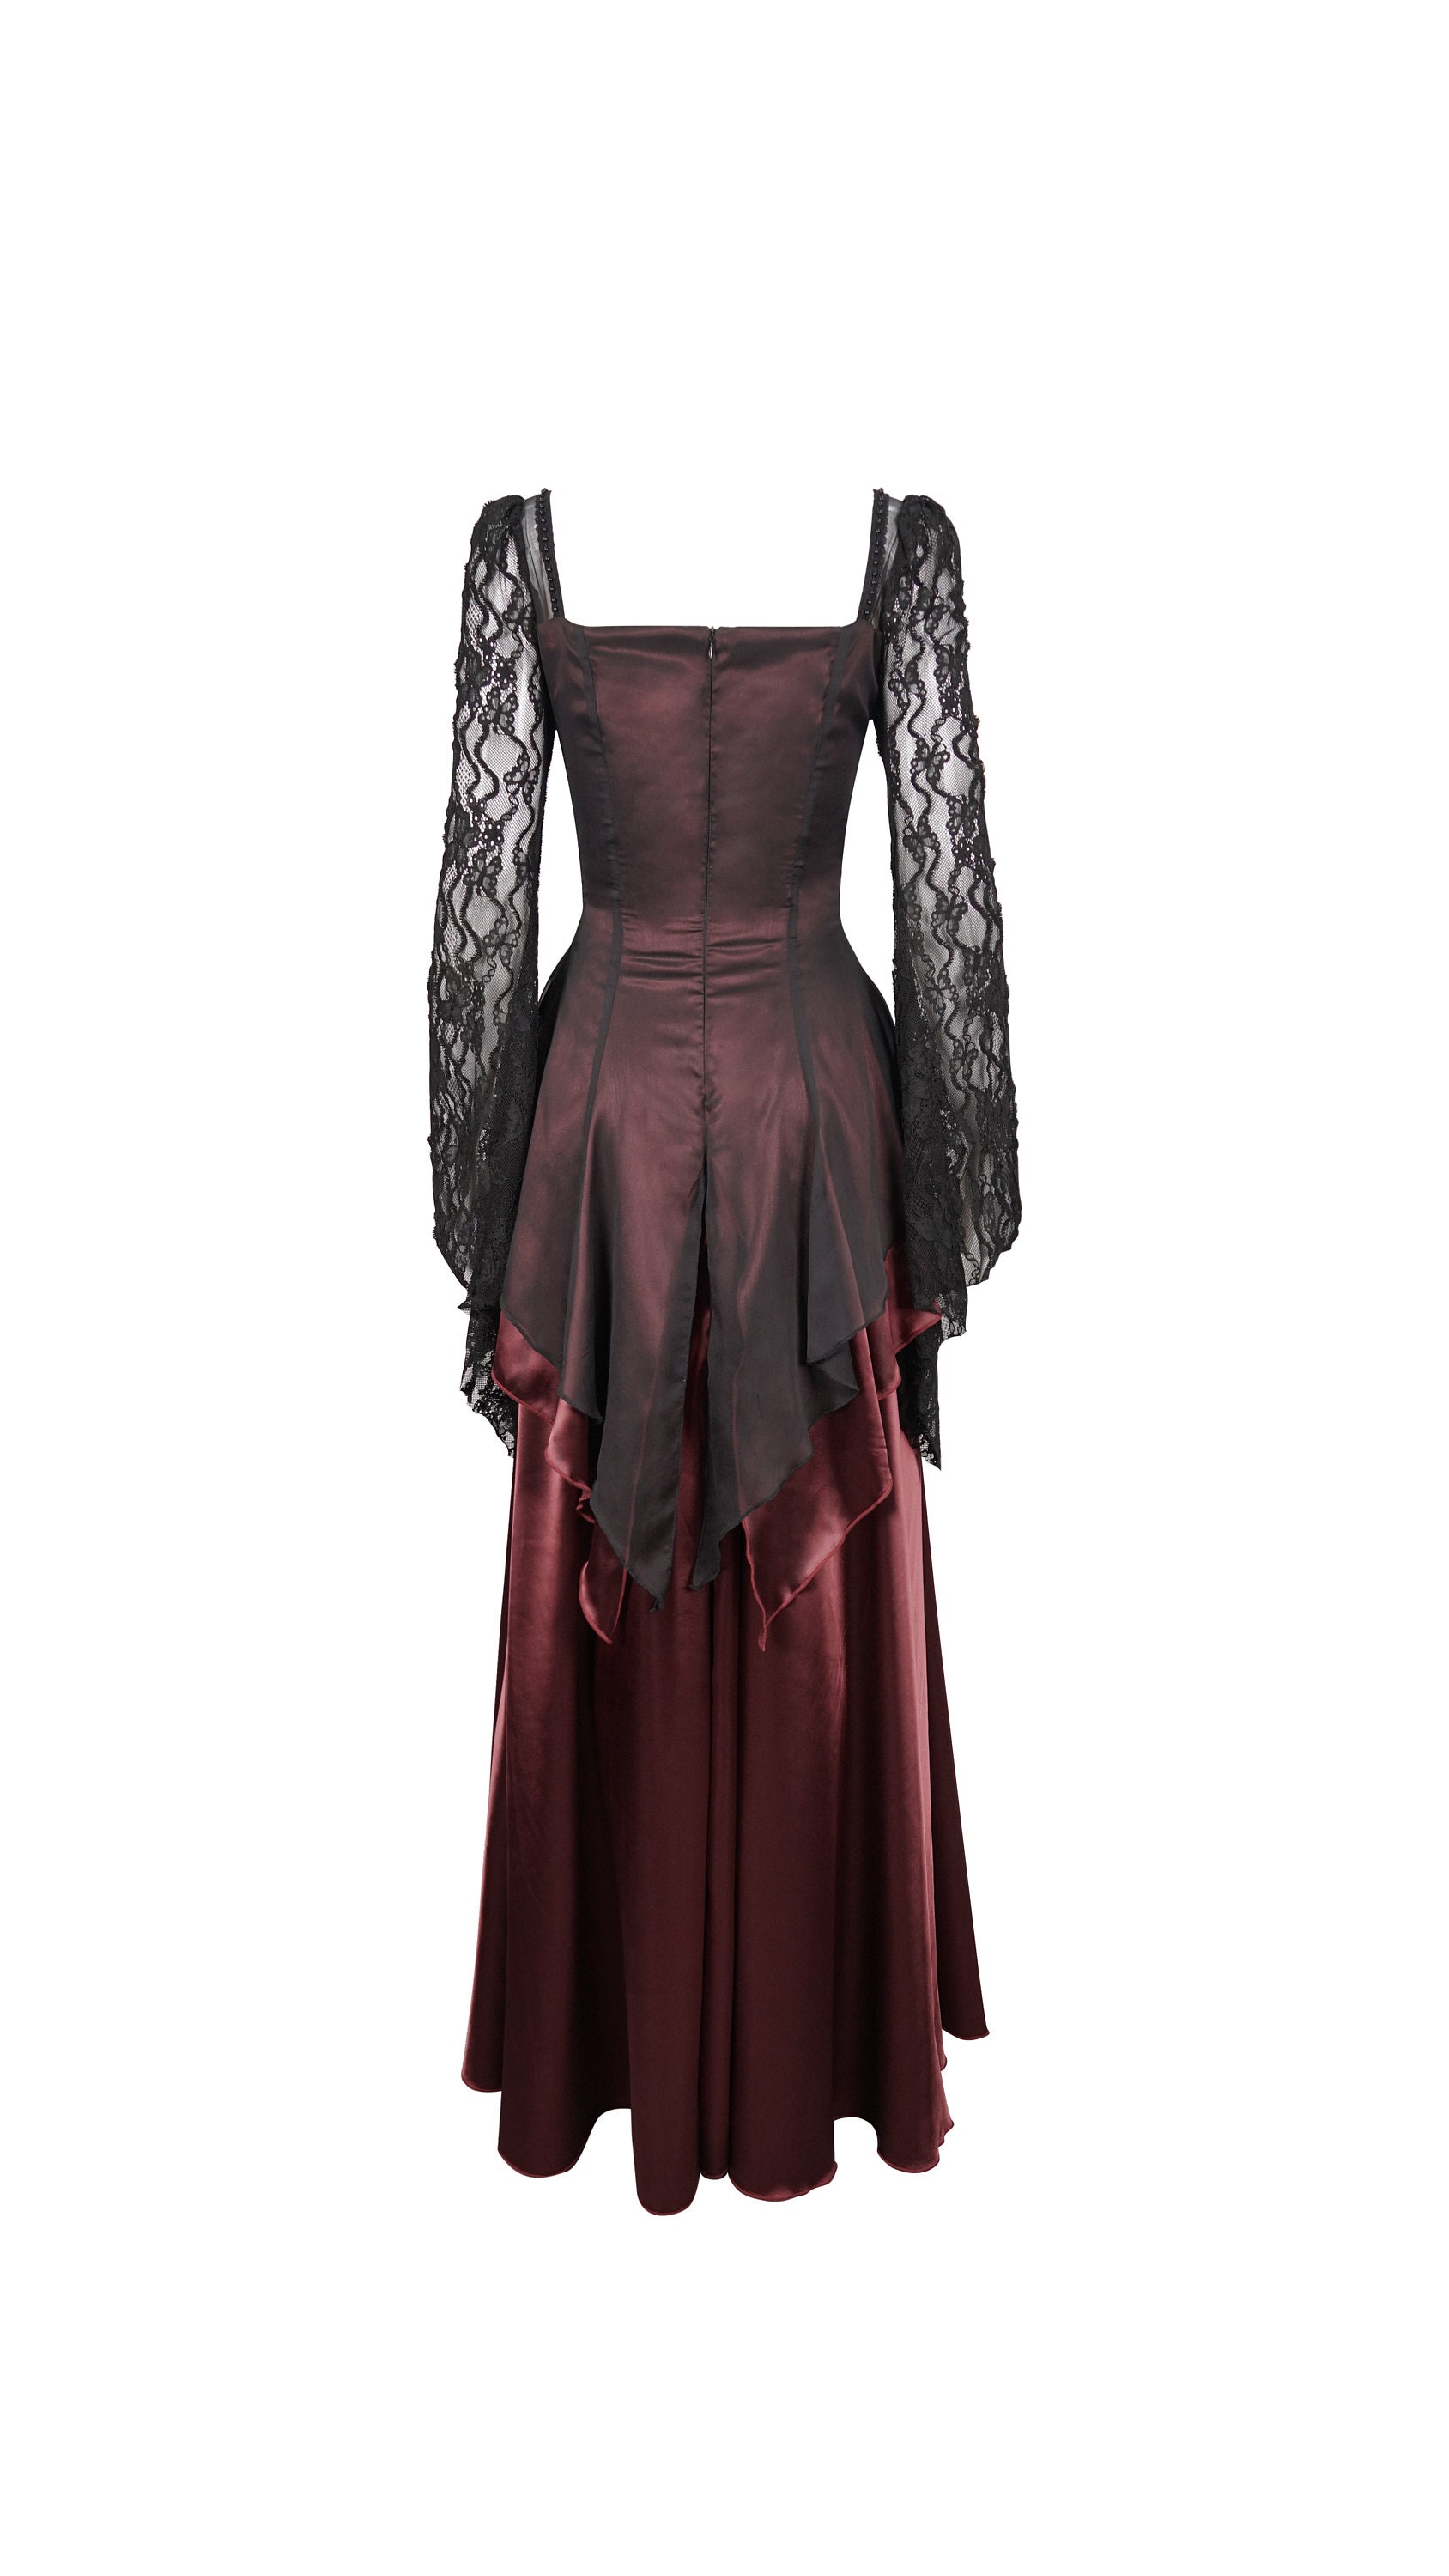 Burgundy Red Satin and Lace Long Dress Gothic Steampunk - Etsy